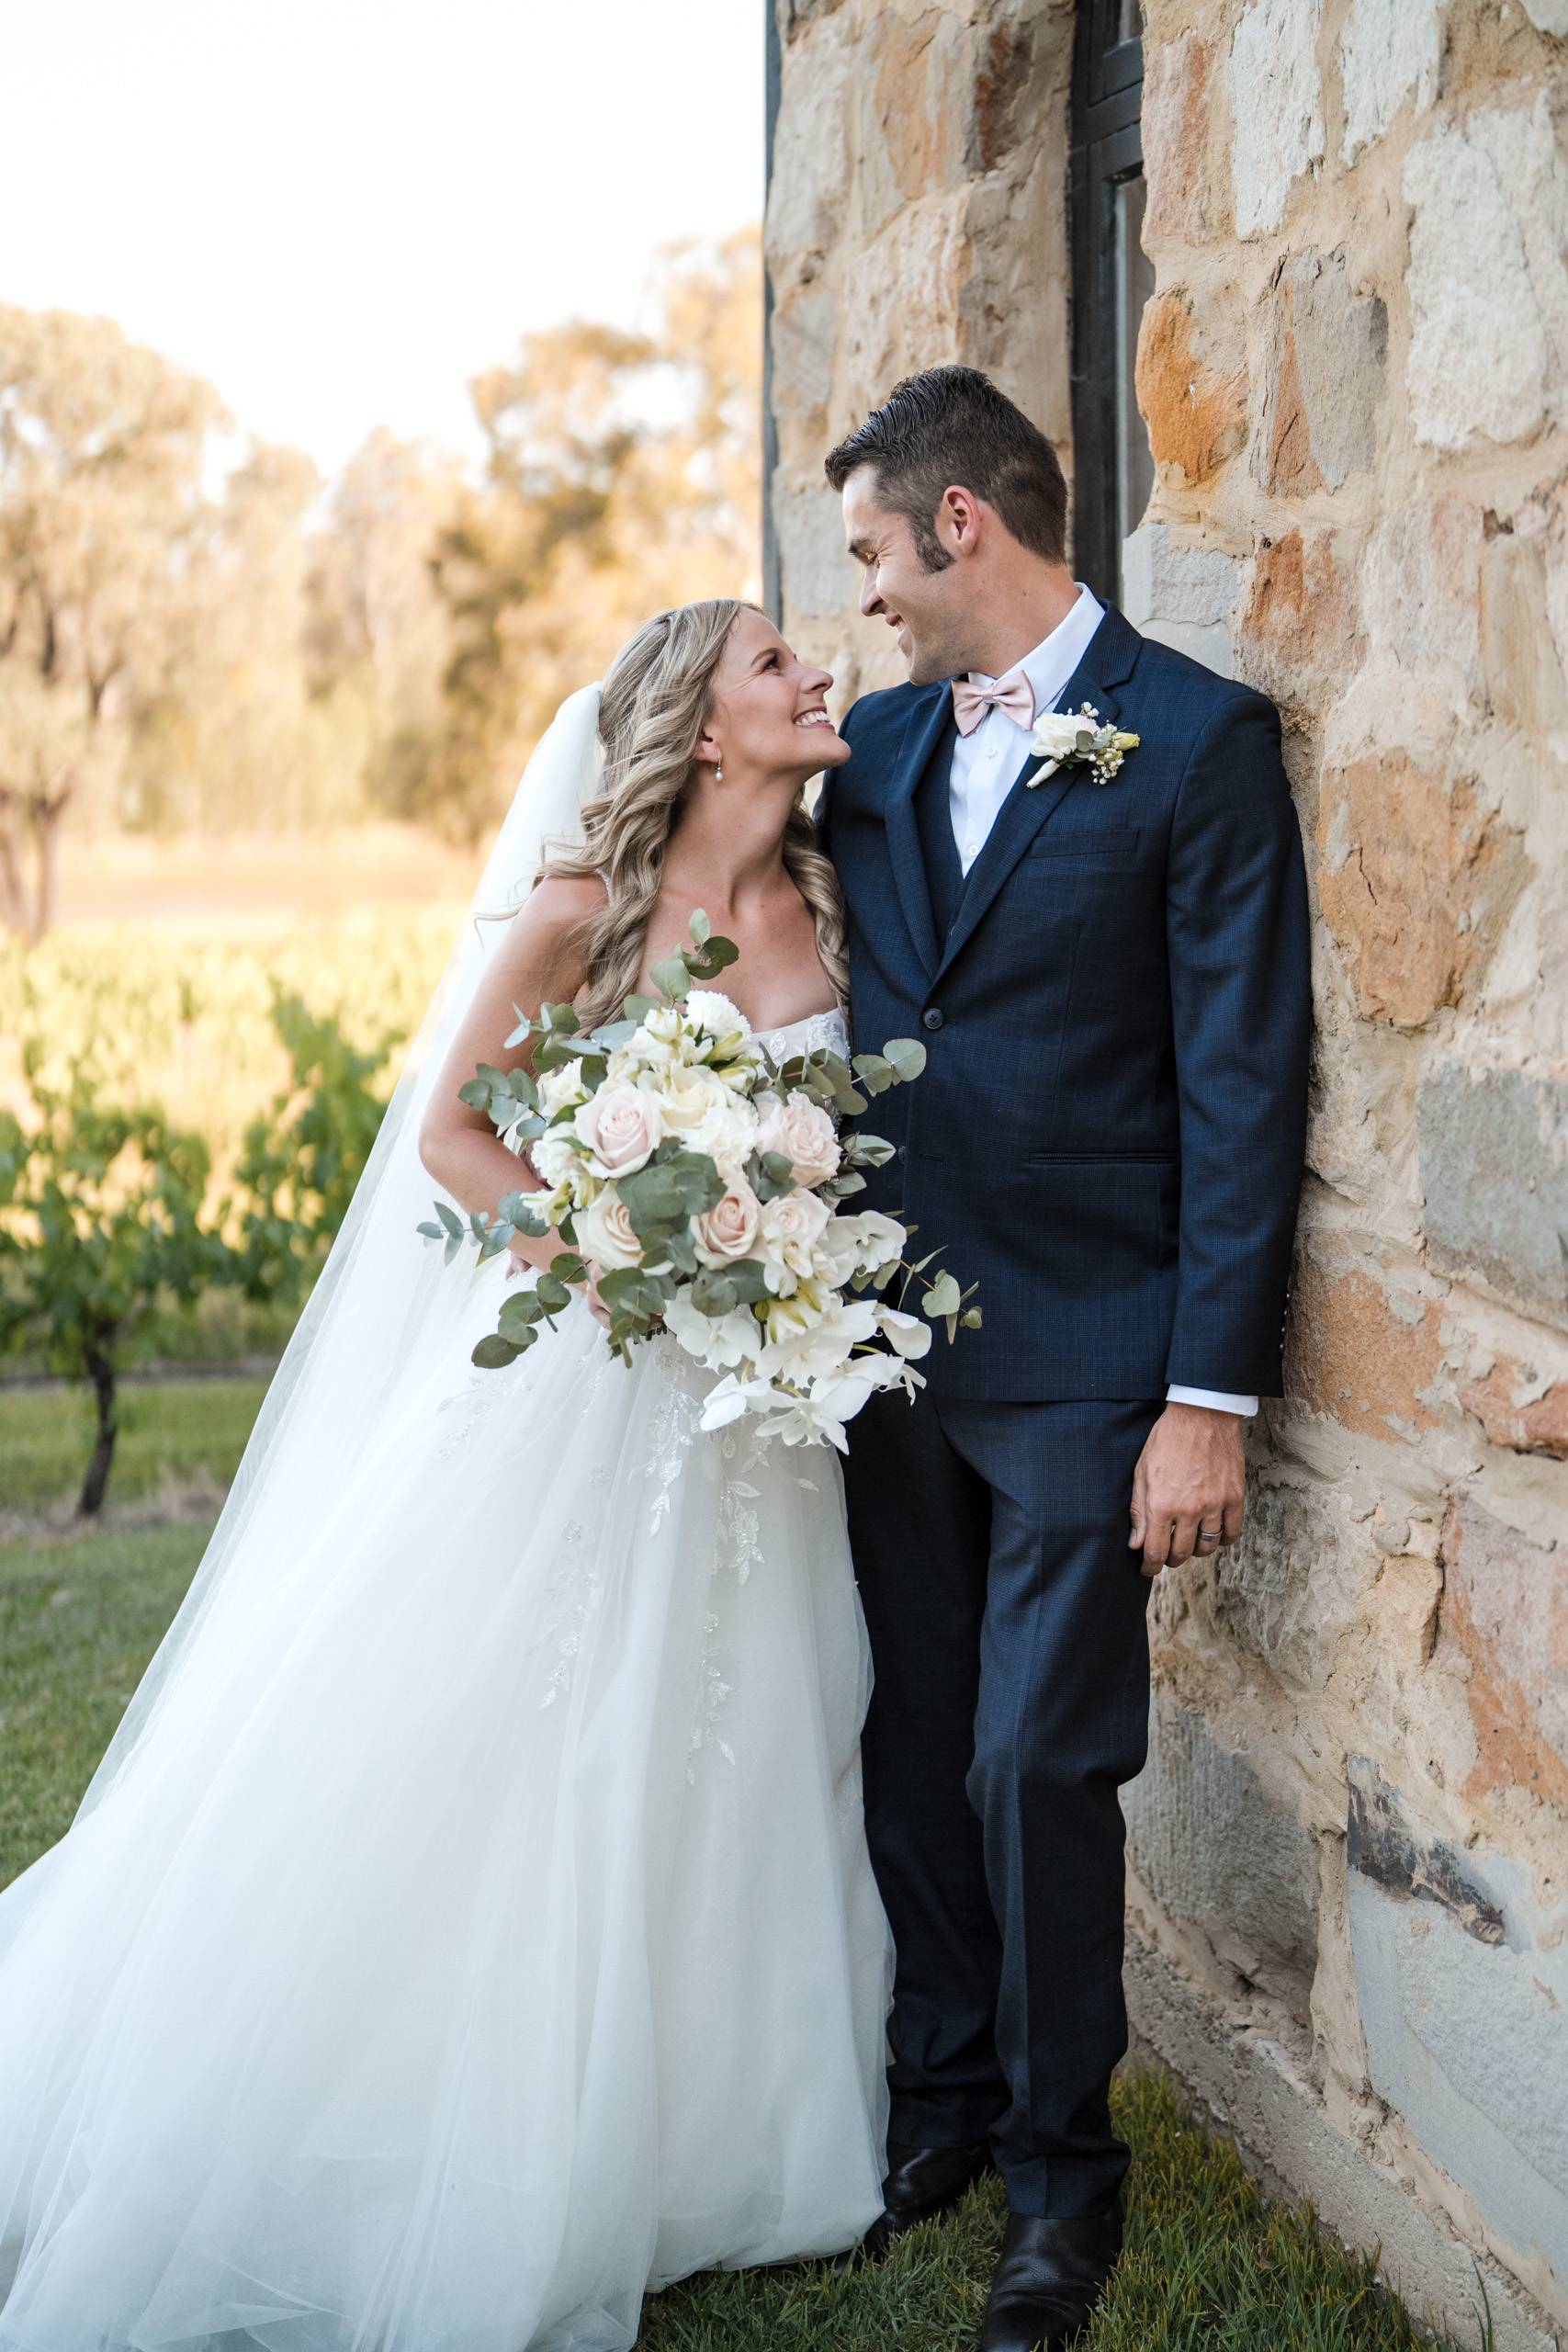 Alanah + Jack // Peppers Creek // Hunter Valley Wedding Photography